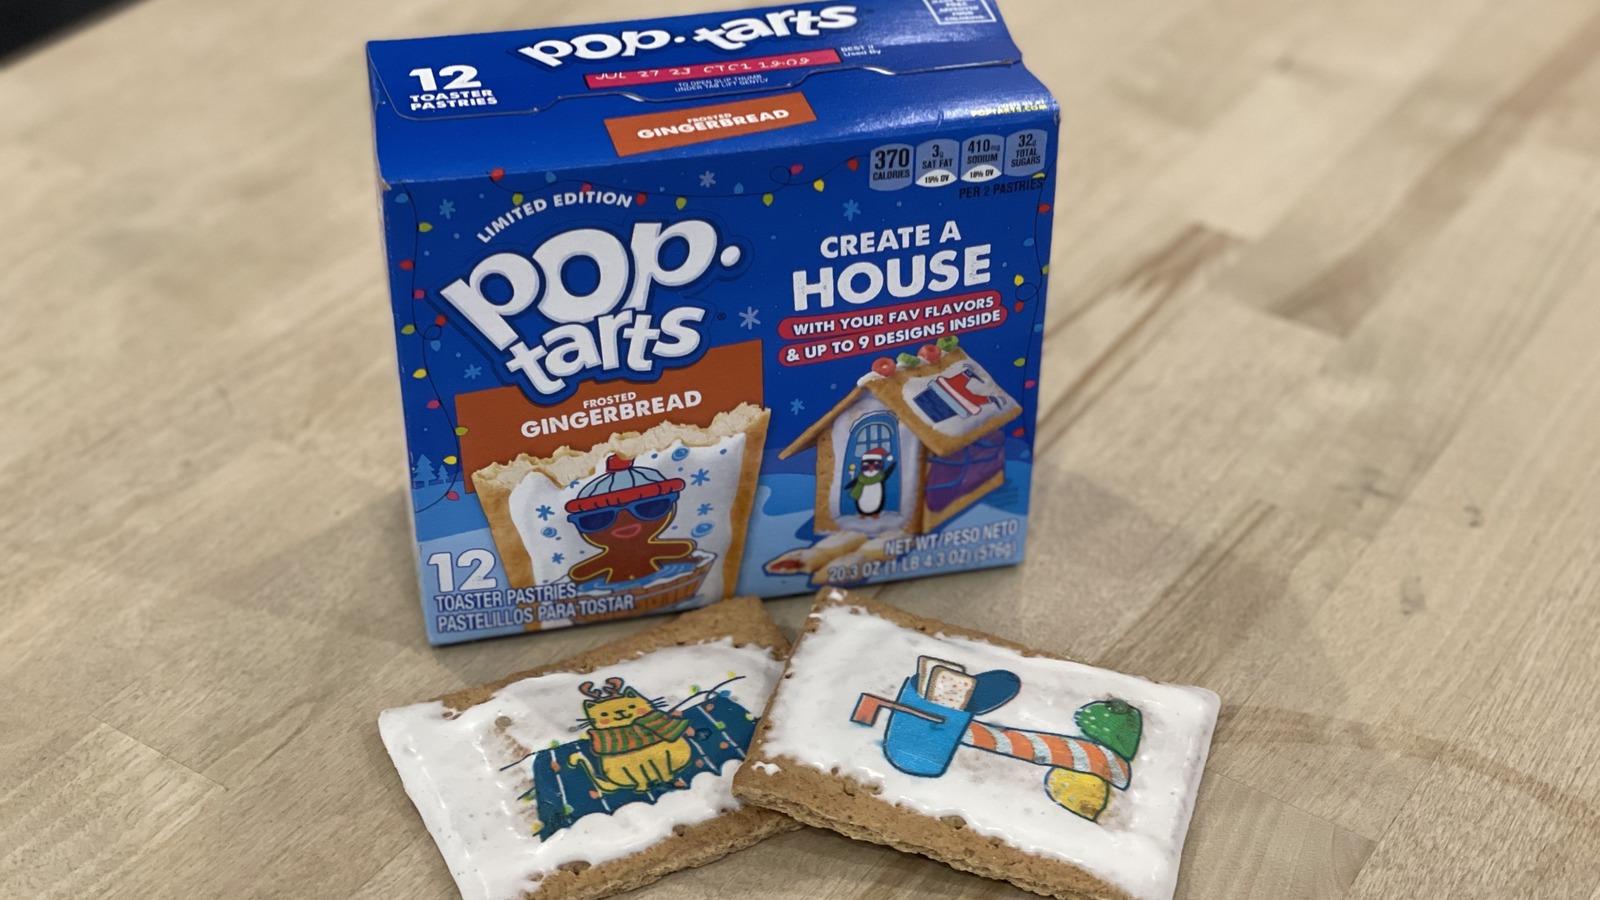 We Tried The New Limited Edition Frosted Gingerbread PopTarts. They're